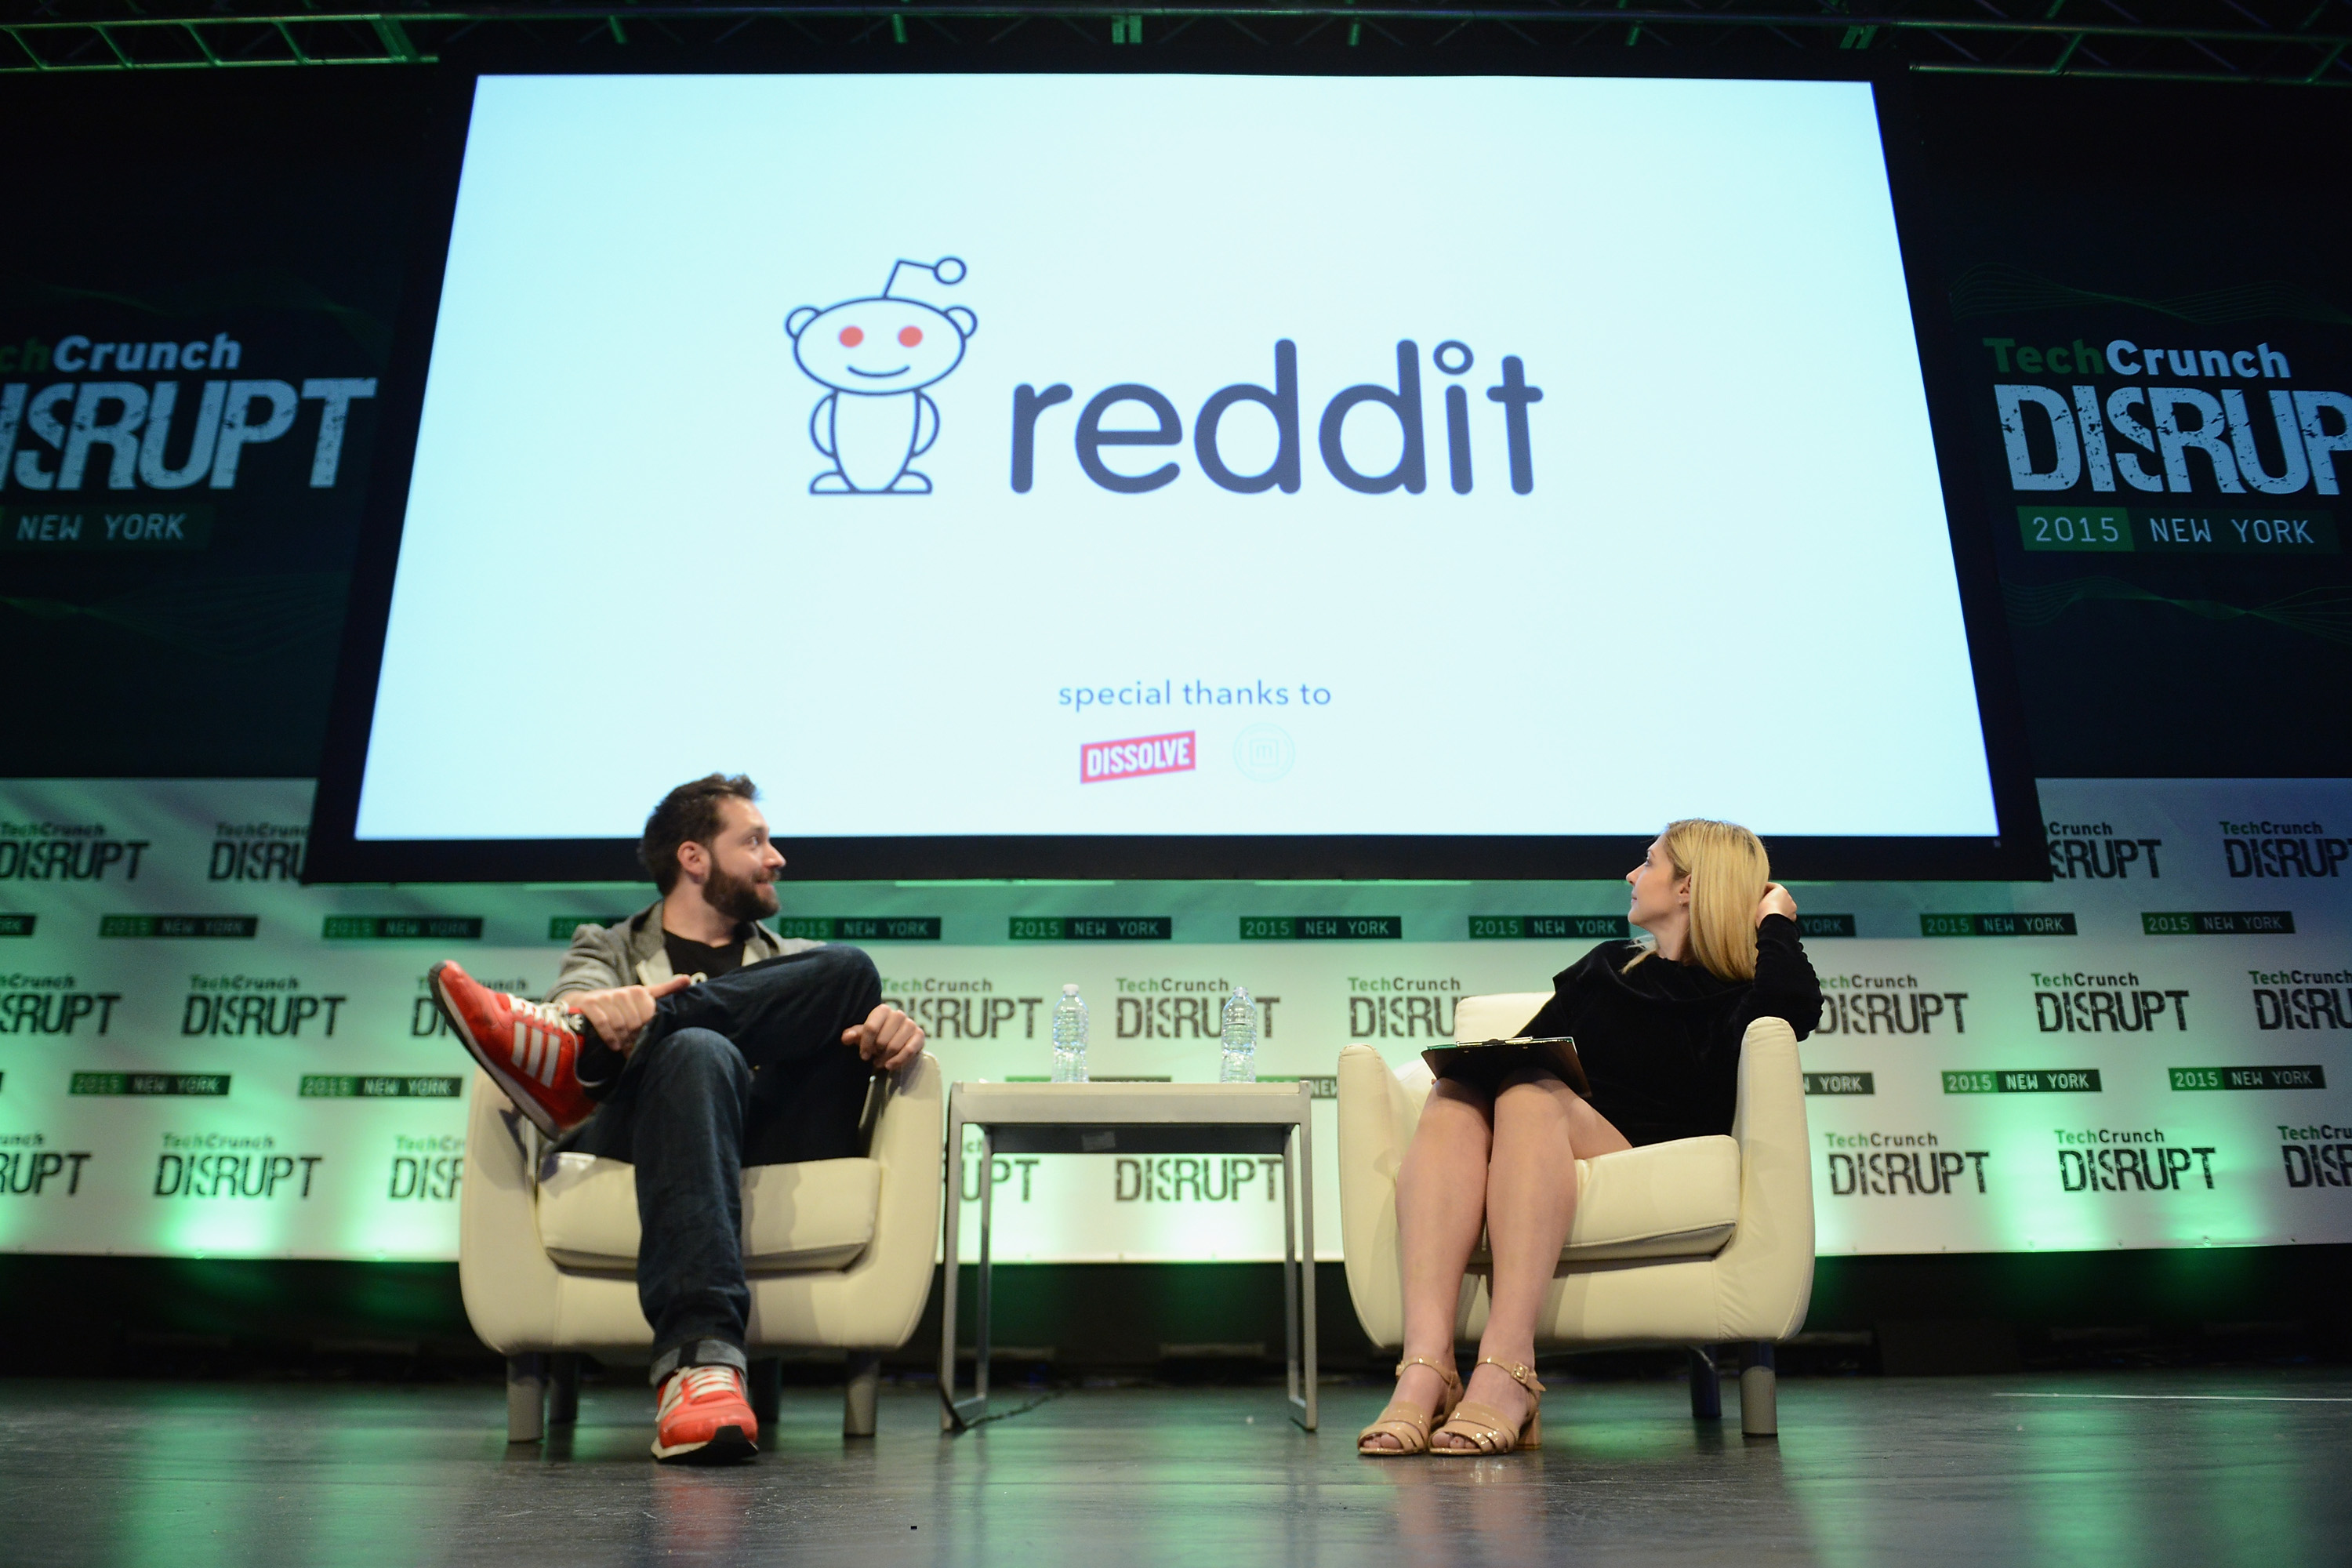 Co-Founder and Executive Chair of Reddit, and Partner at Y Combinator, Alexis Ohanian and co-editor at TechCrunch, Alexia Tsotsis appear onstage during TechCrunch Disrupt NY 2015 - Day 3 at The Manhattan Center on May 6, 2015 in New York City. (Noam Galai&mdash;2015 Getty Images)